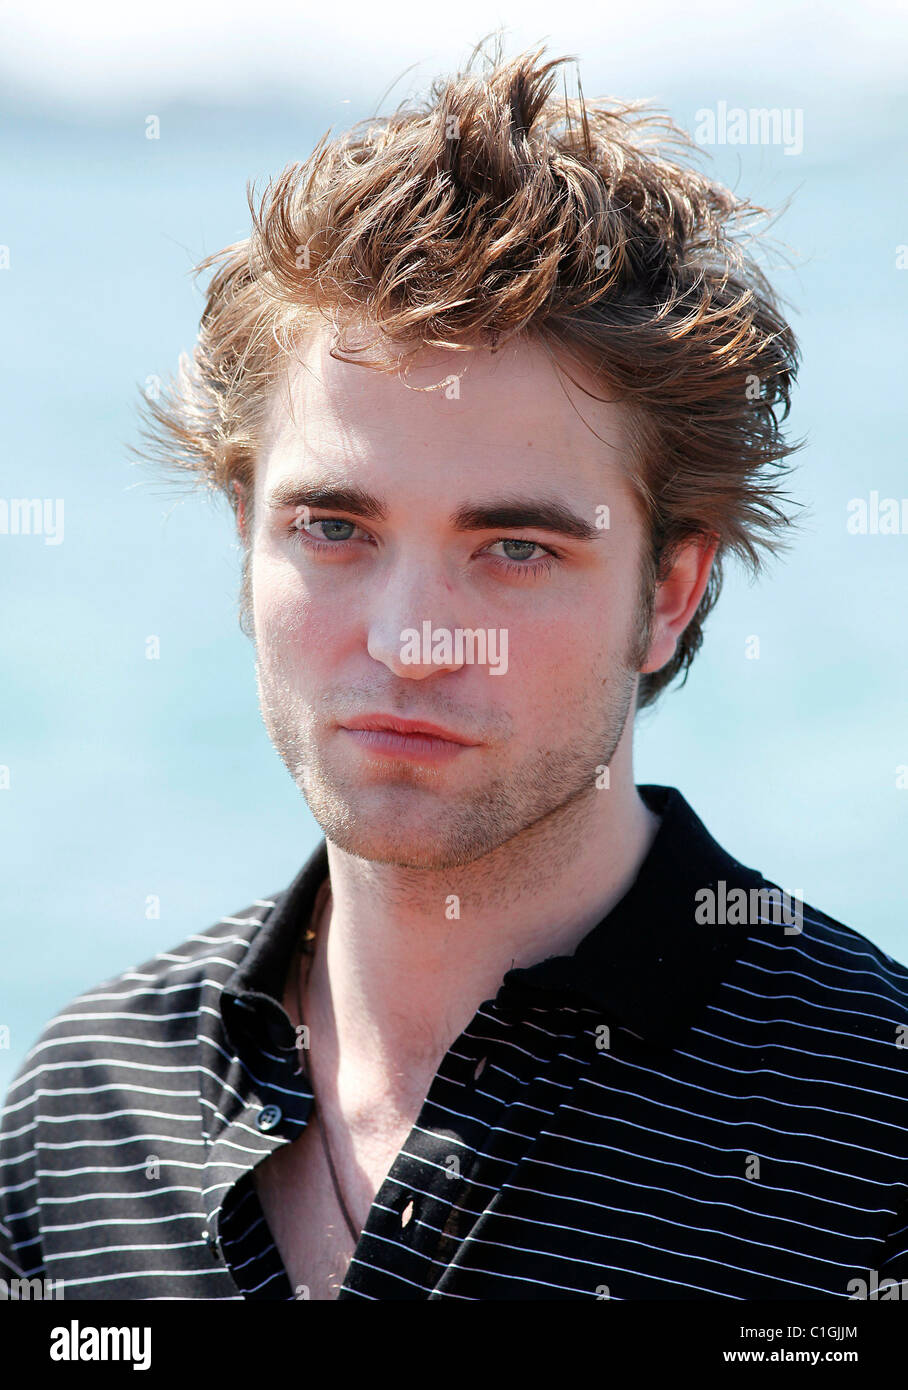 Robert Pattinson The 62nd Cannes Film Festival 2009 Day 7 New Moon, Twilight series - photocall Cannes, Frances - 19.05.09 Stock Photo